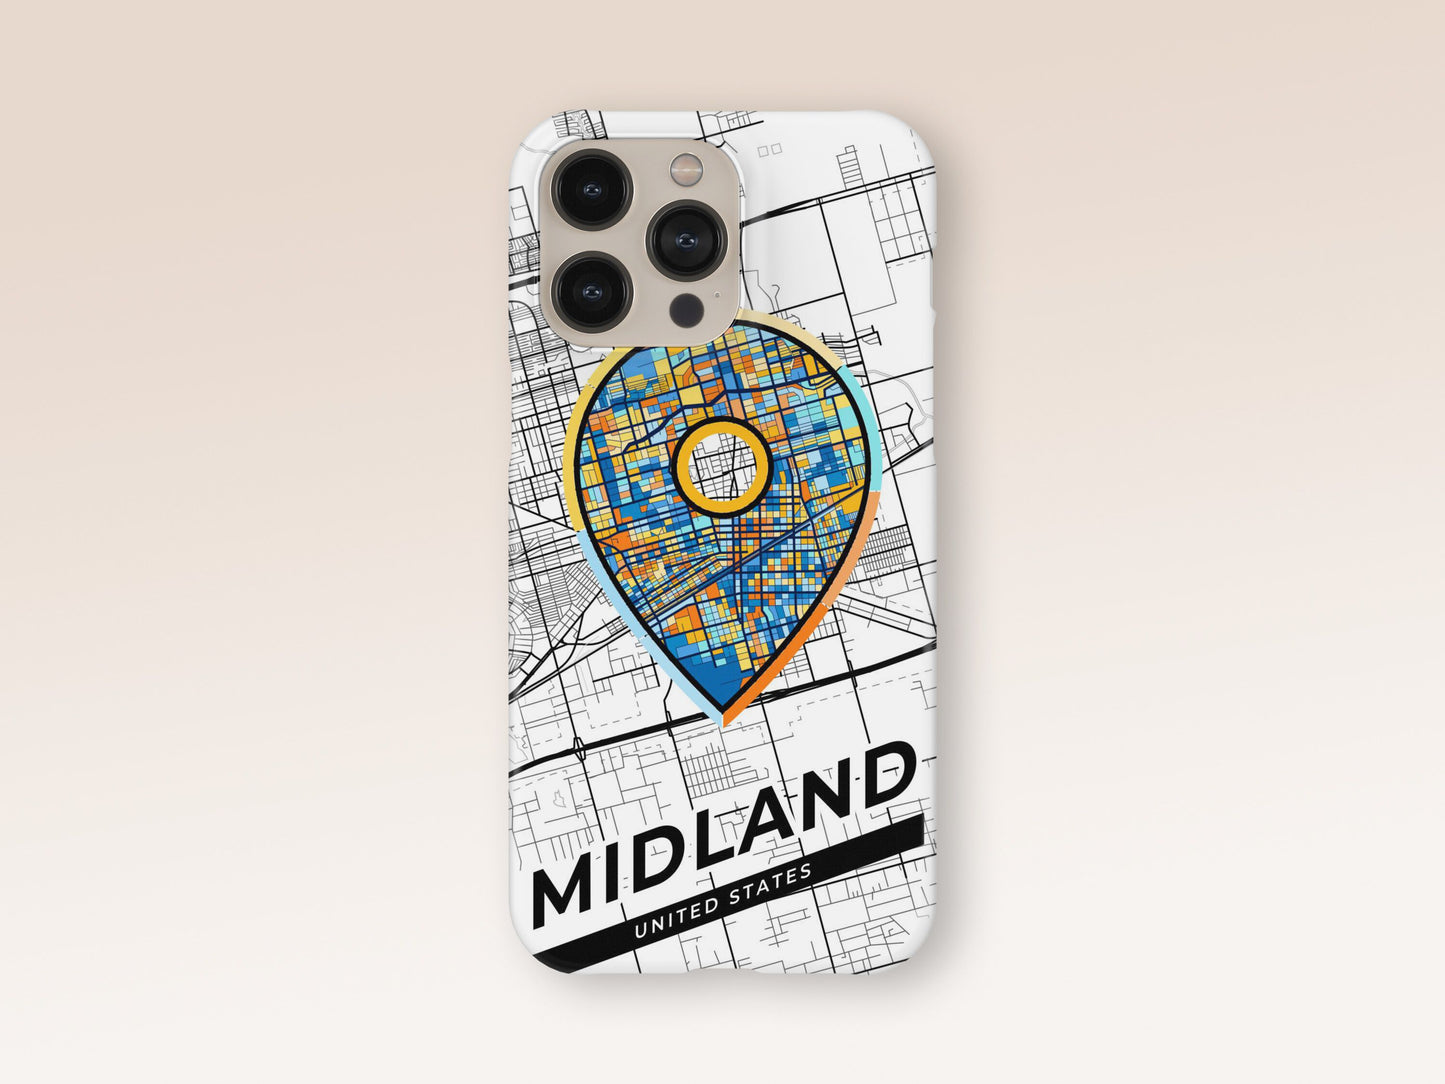 Midland Texas slim phone case with colorful icon 1